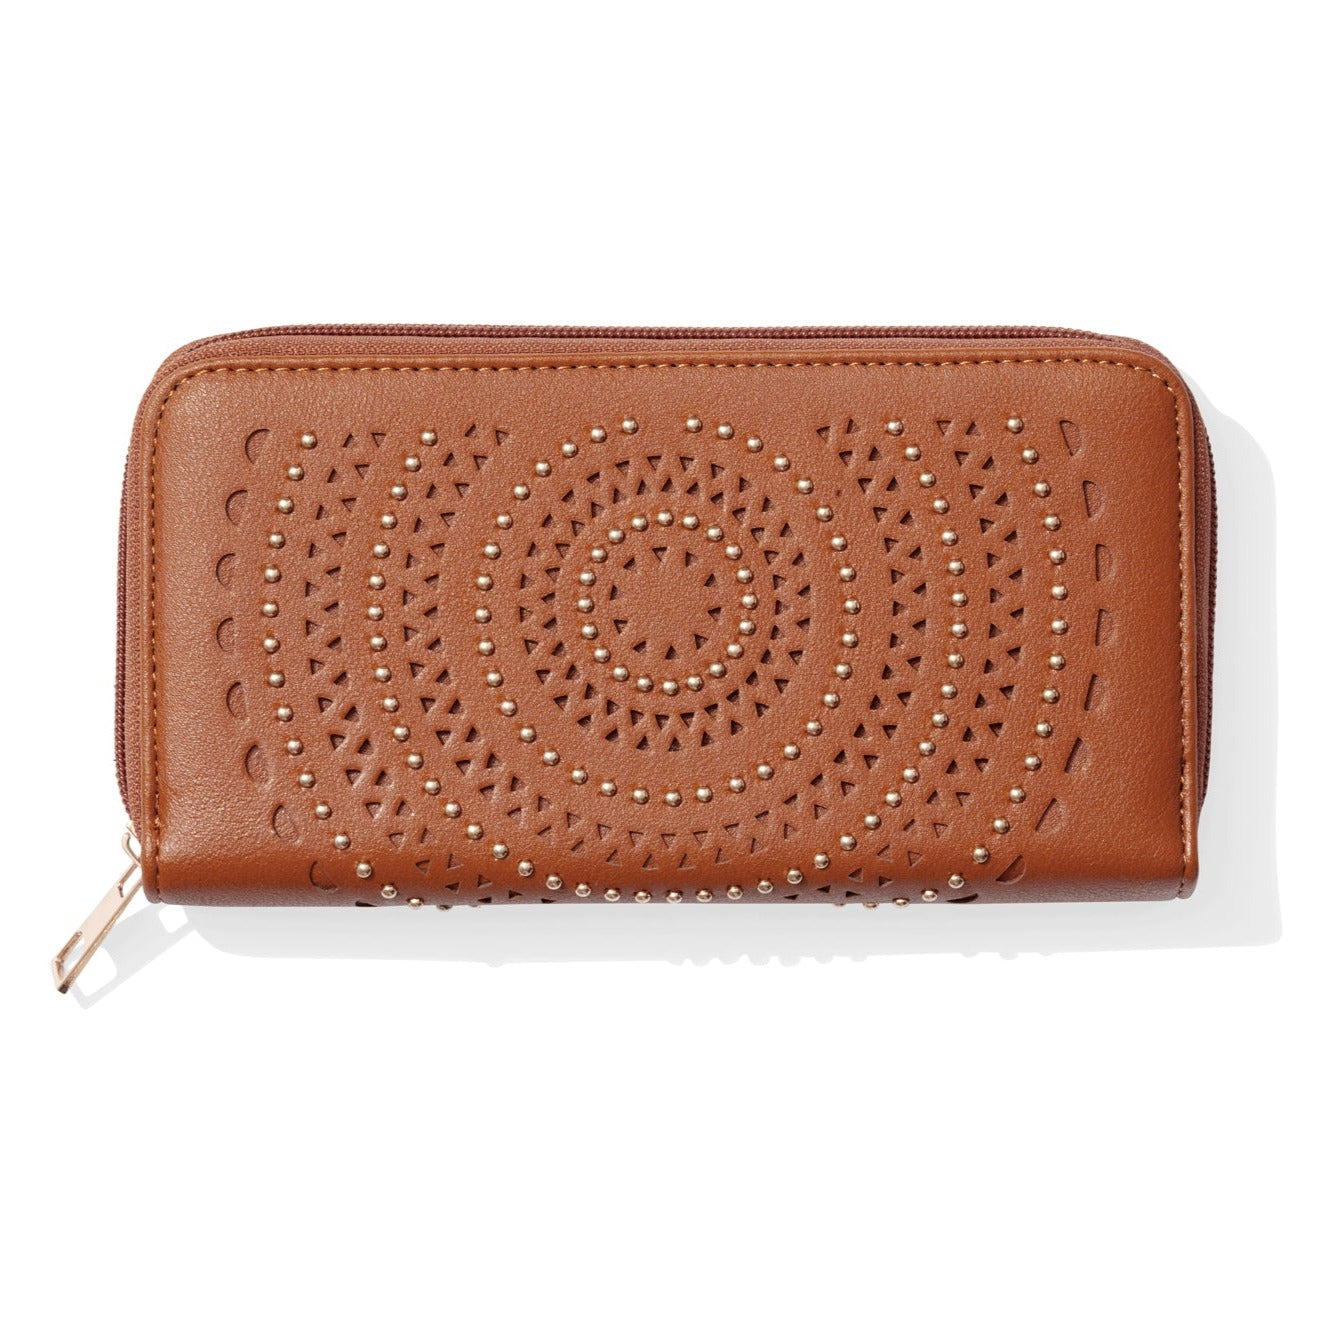 Zippered wallet with circular studs and cutouts on a tan background